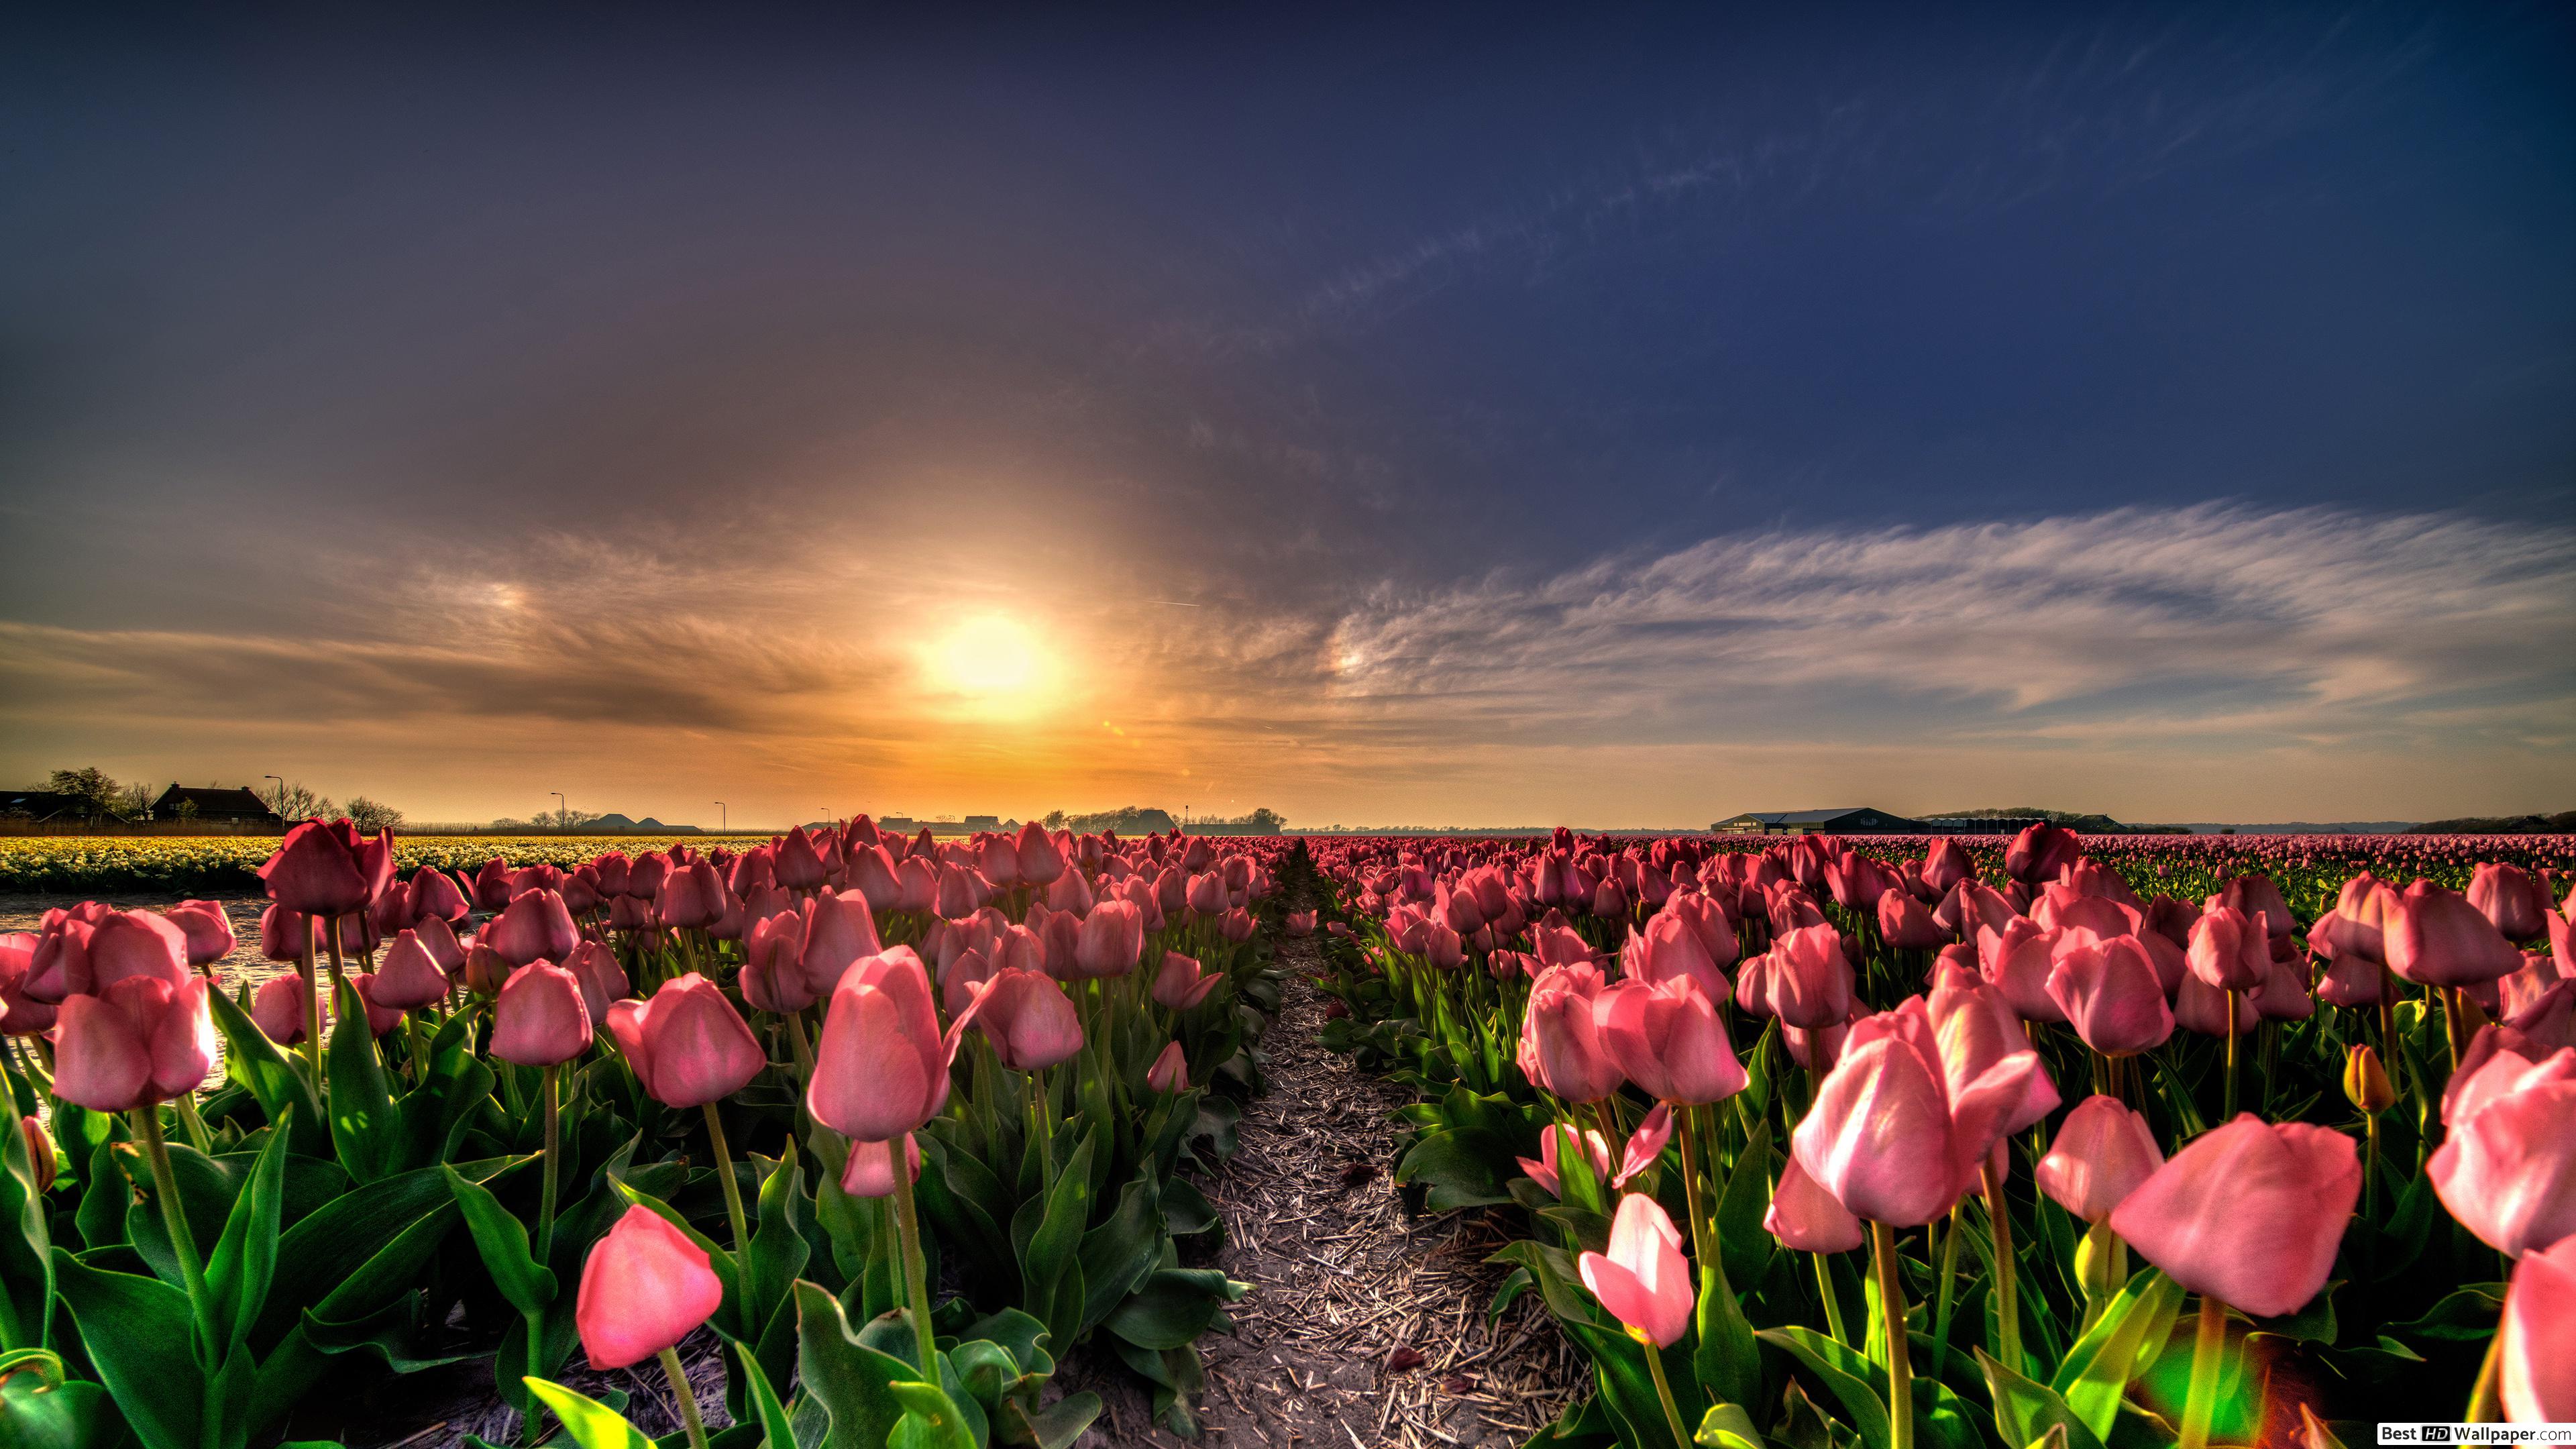 Sunset in a field of tulips HD wallpaper download